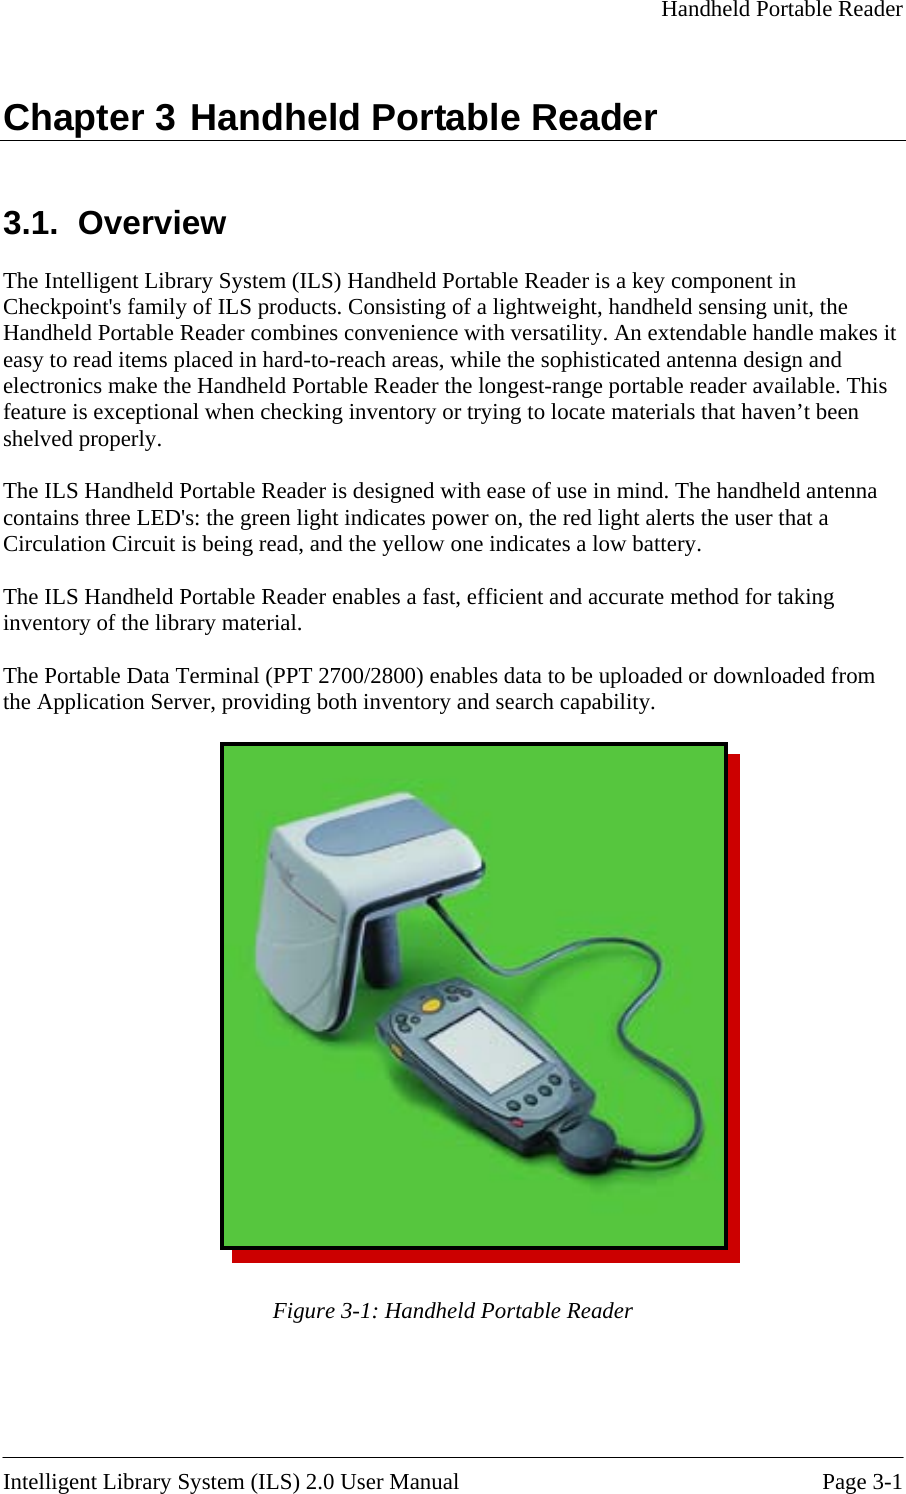     Handheld Portable Reader  Chapter 3 Handheld Portable Reader 3.1. Overview The Intelligent Library System (ILS) Handheld Portable Reader is a key component in Checkpoint&apos;s family of ILS products. Consisting of a lightweight, handheld sensing unit, the Handheld Portable Reader combines convenience with versatility. An extendable handle makes it easy to read items placed in hard-to-reach areas, while the sophisticated antenna design and electronics make the Handheld Portable Reader the longest-range portable reader available. This feature is exceptional when checking inventory or trying to locate materials that haven’t been shelved properly.  The ILS Handheld Portable Reader is designed with ease of use in mind. The handheld antenna contains three LED&apos;s: the green light indicates power on, the red light alerts the user that a Circulation Circuit is being read, and the yellow one indicates a low battery.  The ILS Handheld Portable Reader enables a fast, efficient and accurate method for taking inventory of the library material.  The Portable Data Terminal (PPT 2700/2800) enables data to be uploaded or downloaded from the Application Server, providing both inventory and search capability.   Figure 3-1: Handheld Portable Reader   Intelligent Library System (ILS) 2.0 User Manual  Page 3-1 